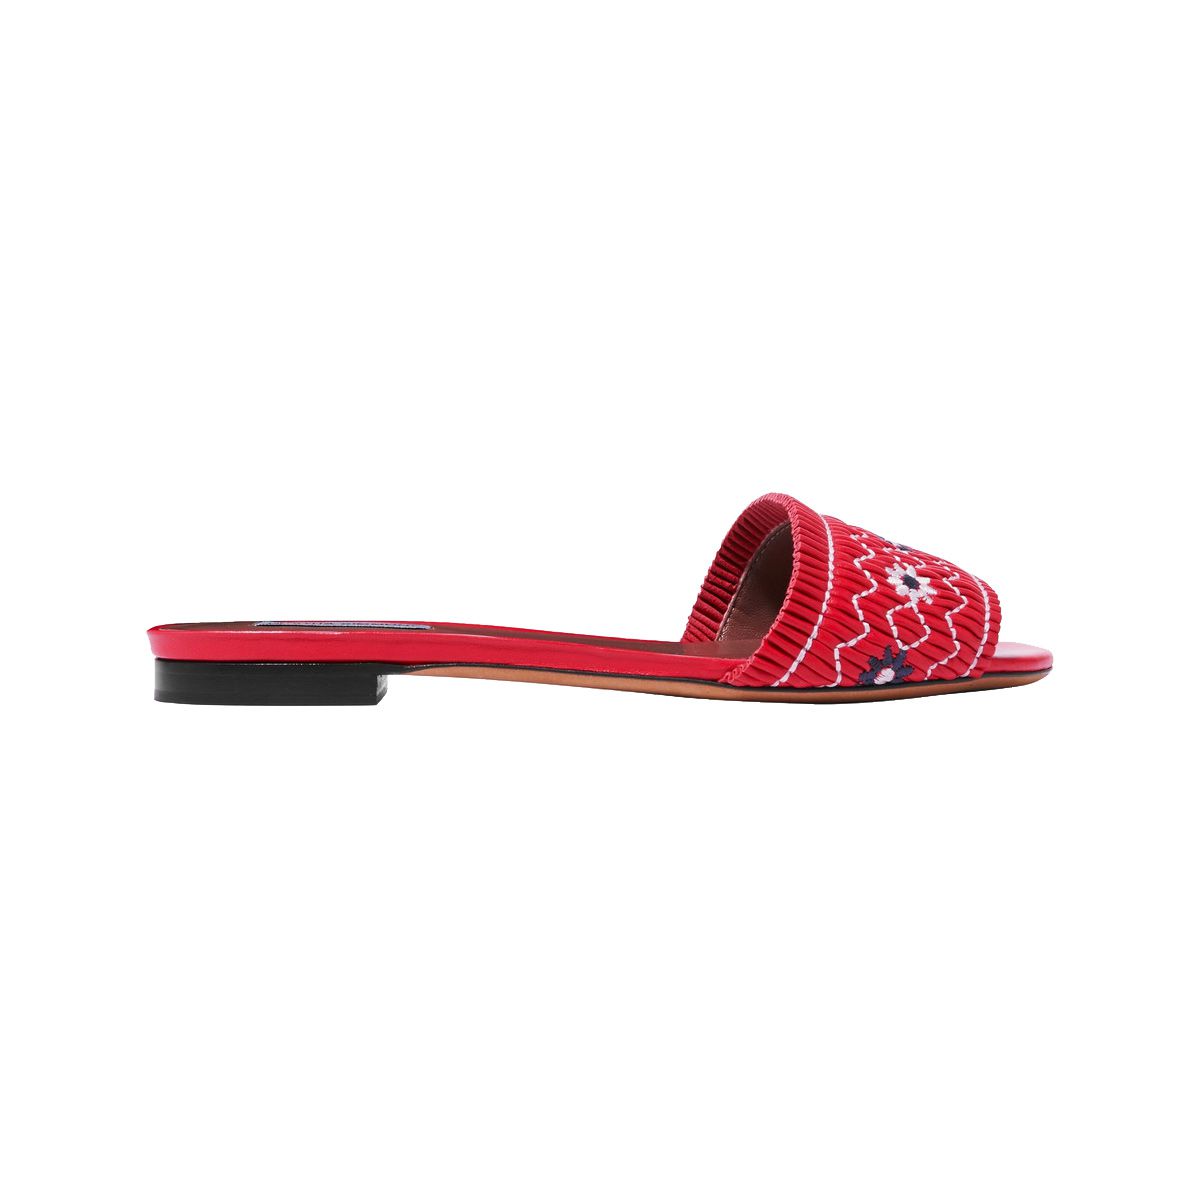 RED EMBROIDERED SLIDES